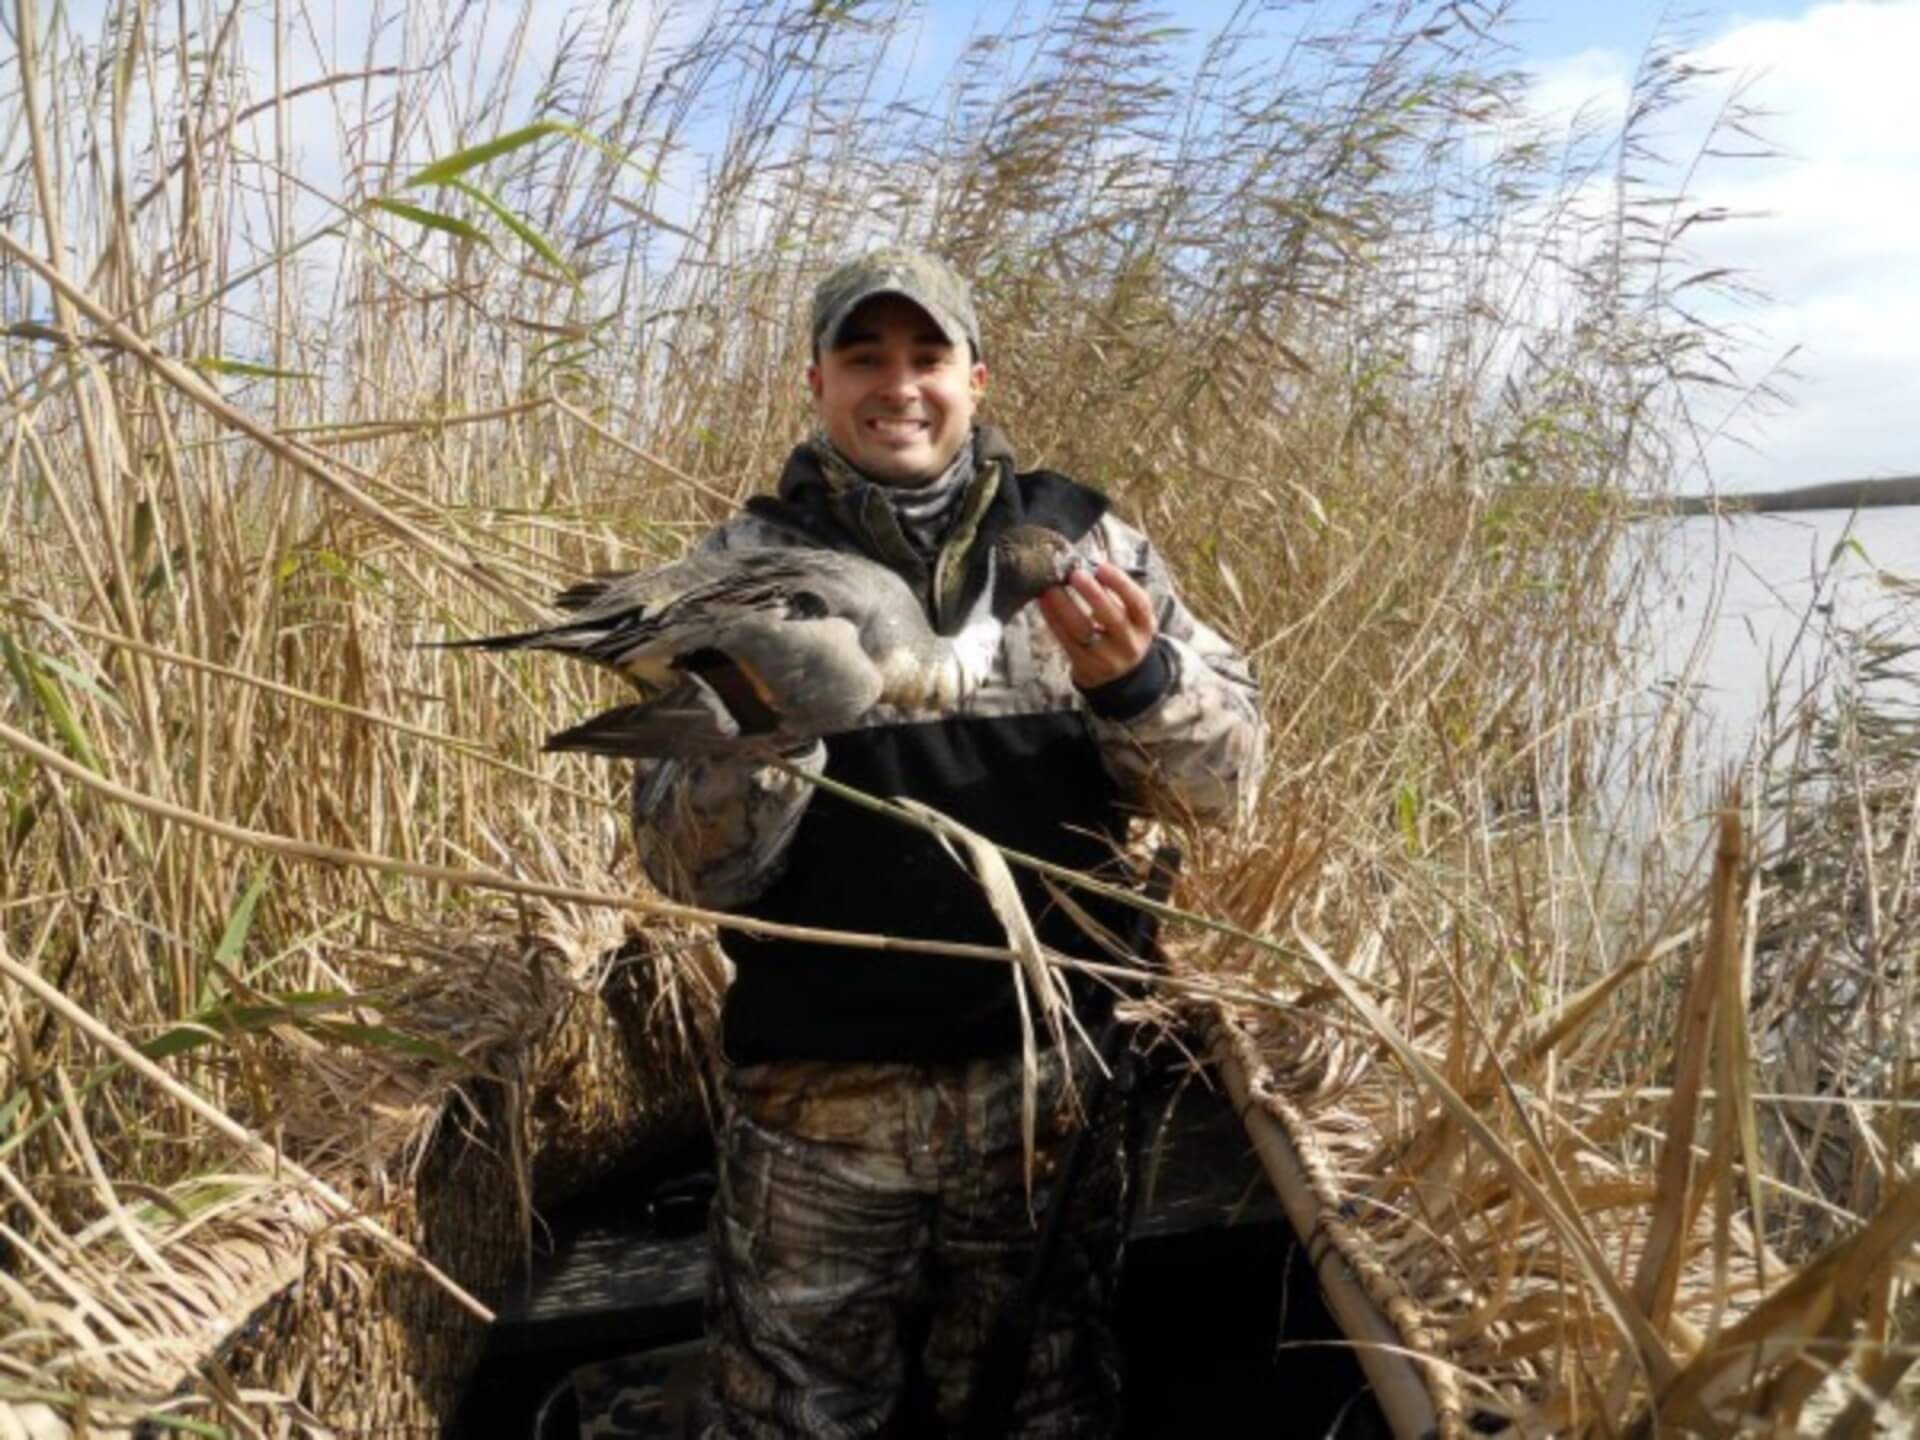 Duck caught on hunting trip in Venice, Louisiana